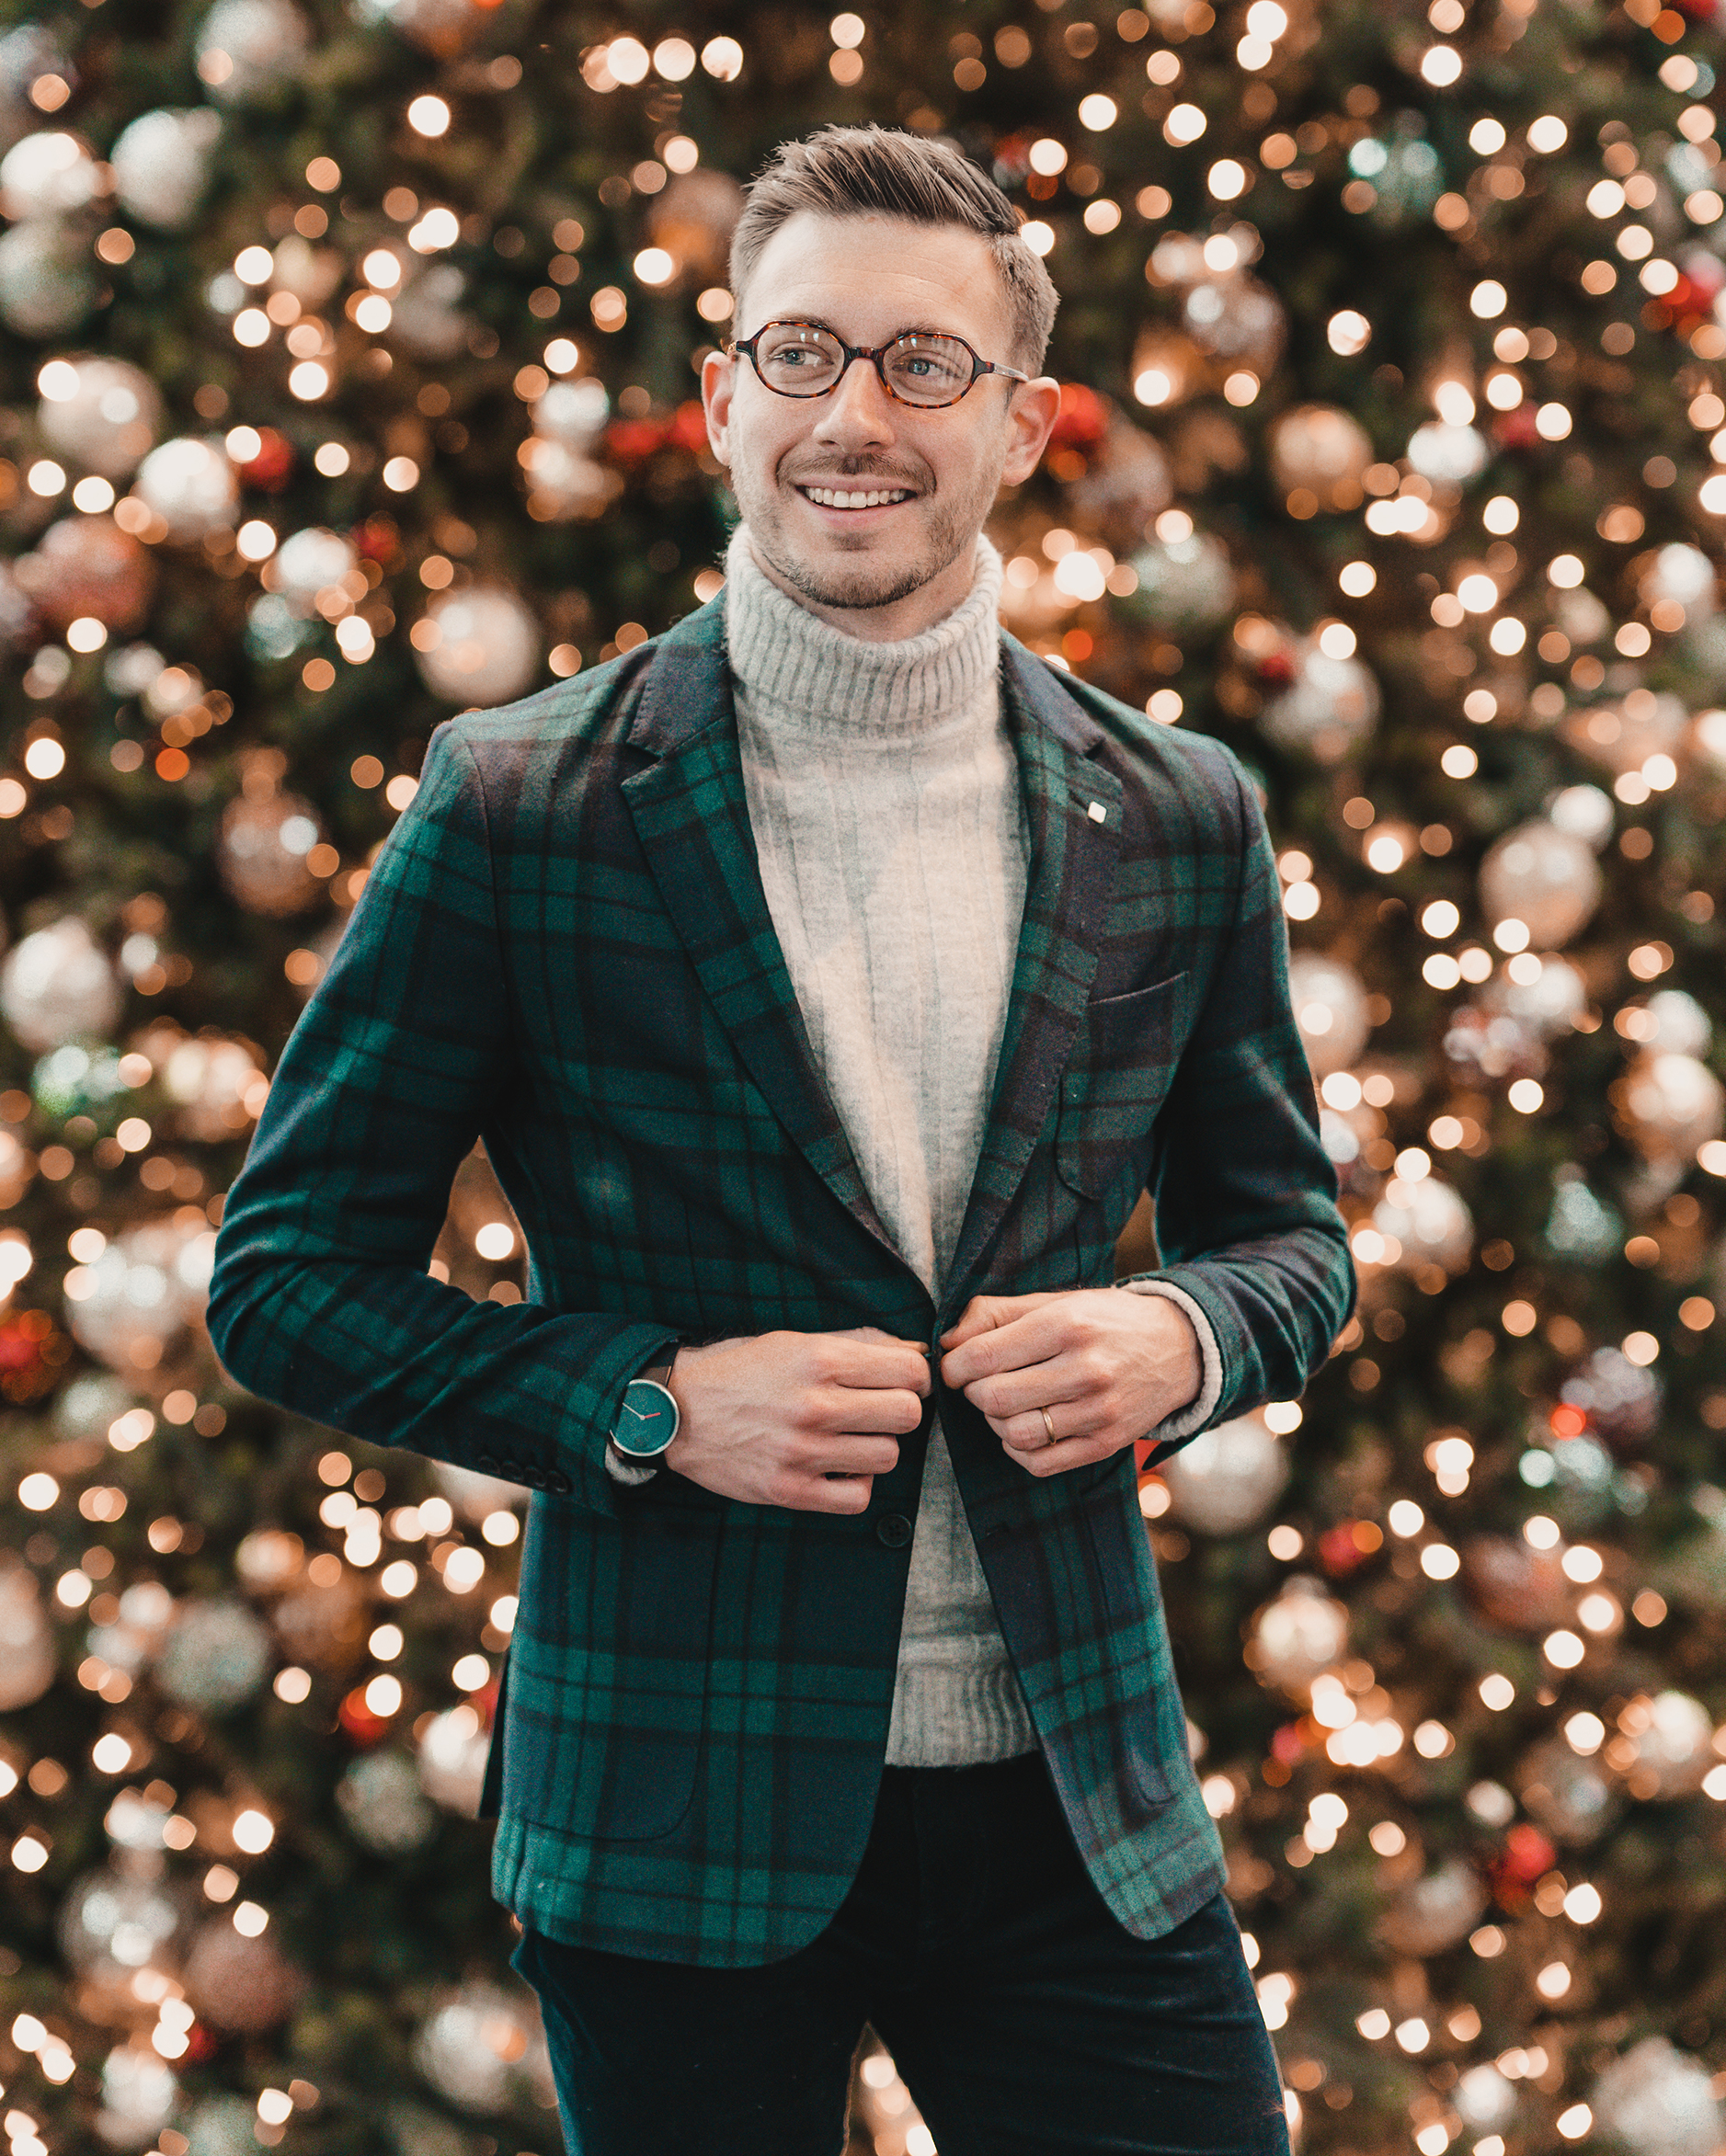 How to Dress with Festive Style During the Holidays